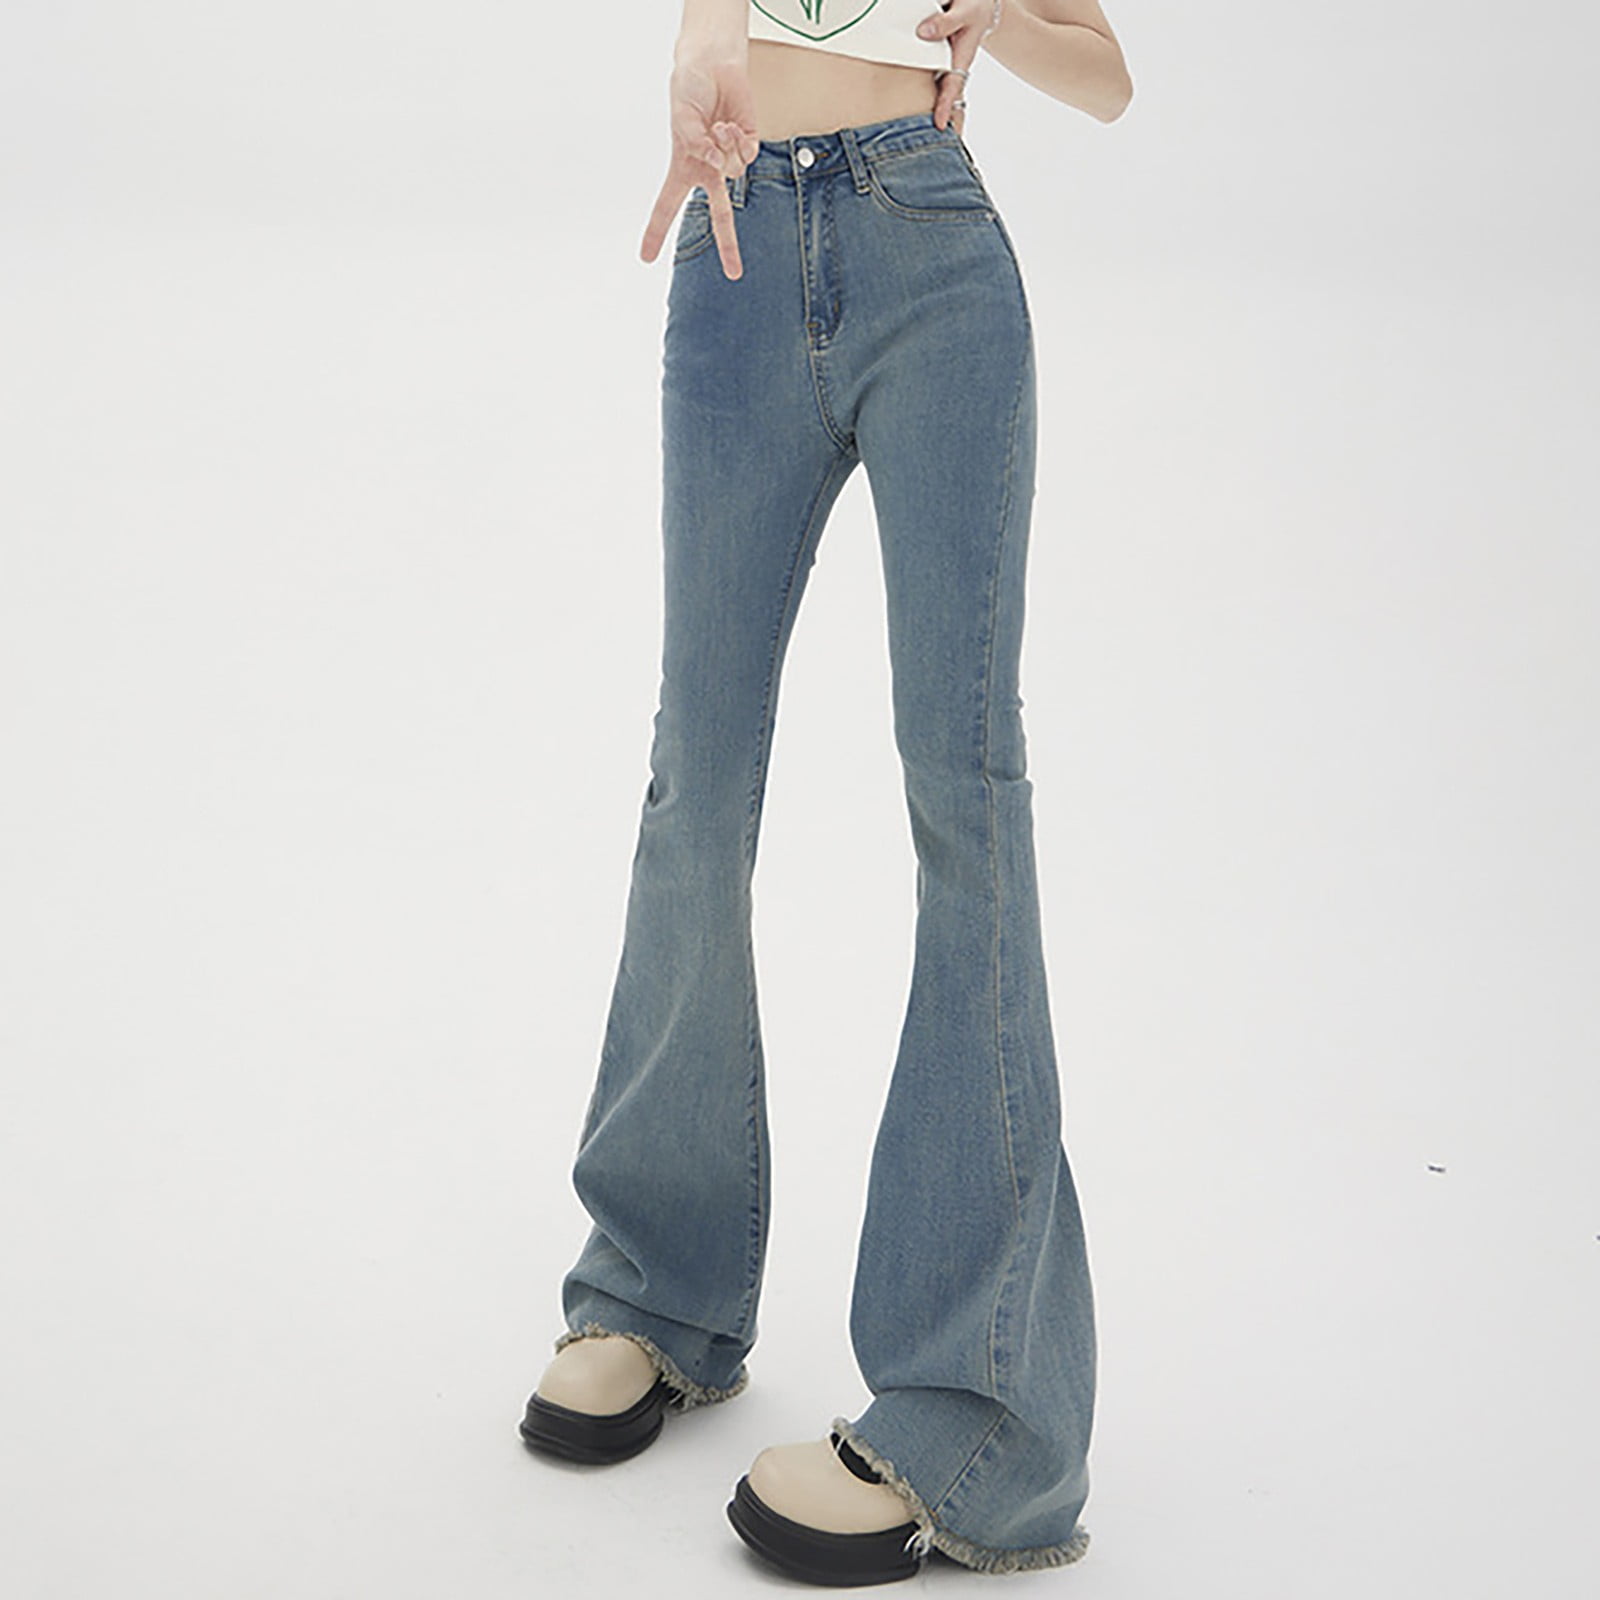 Aayomet Womens Tall Pants High Waist Flared Jeans Slim Slim Simple And  Exquisite Design,Blue M 